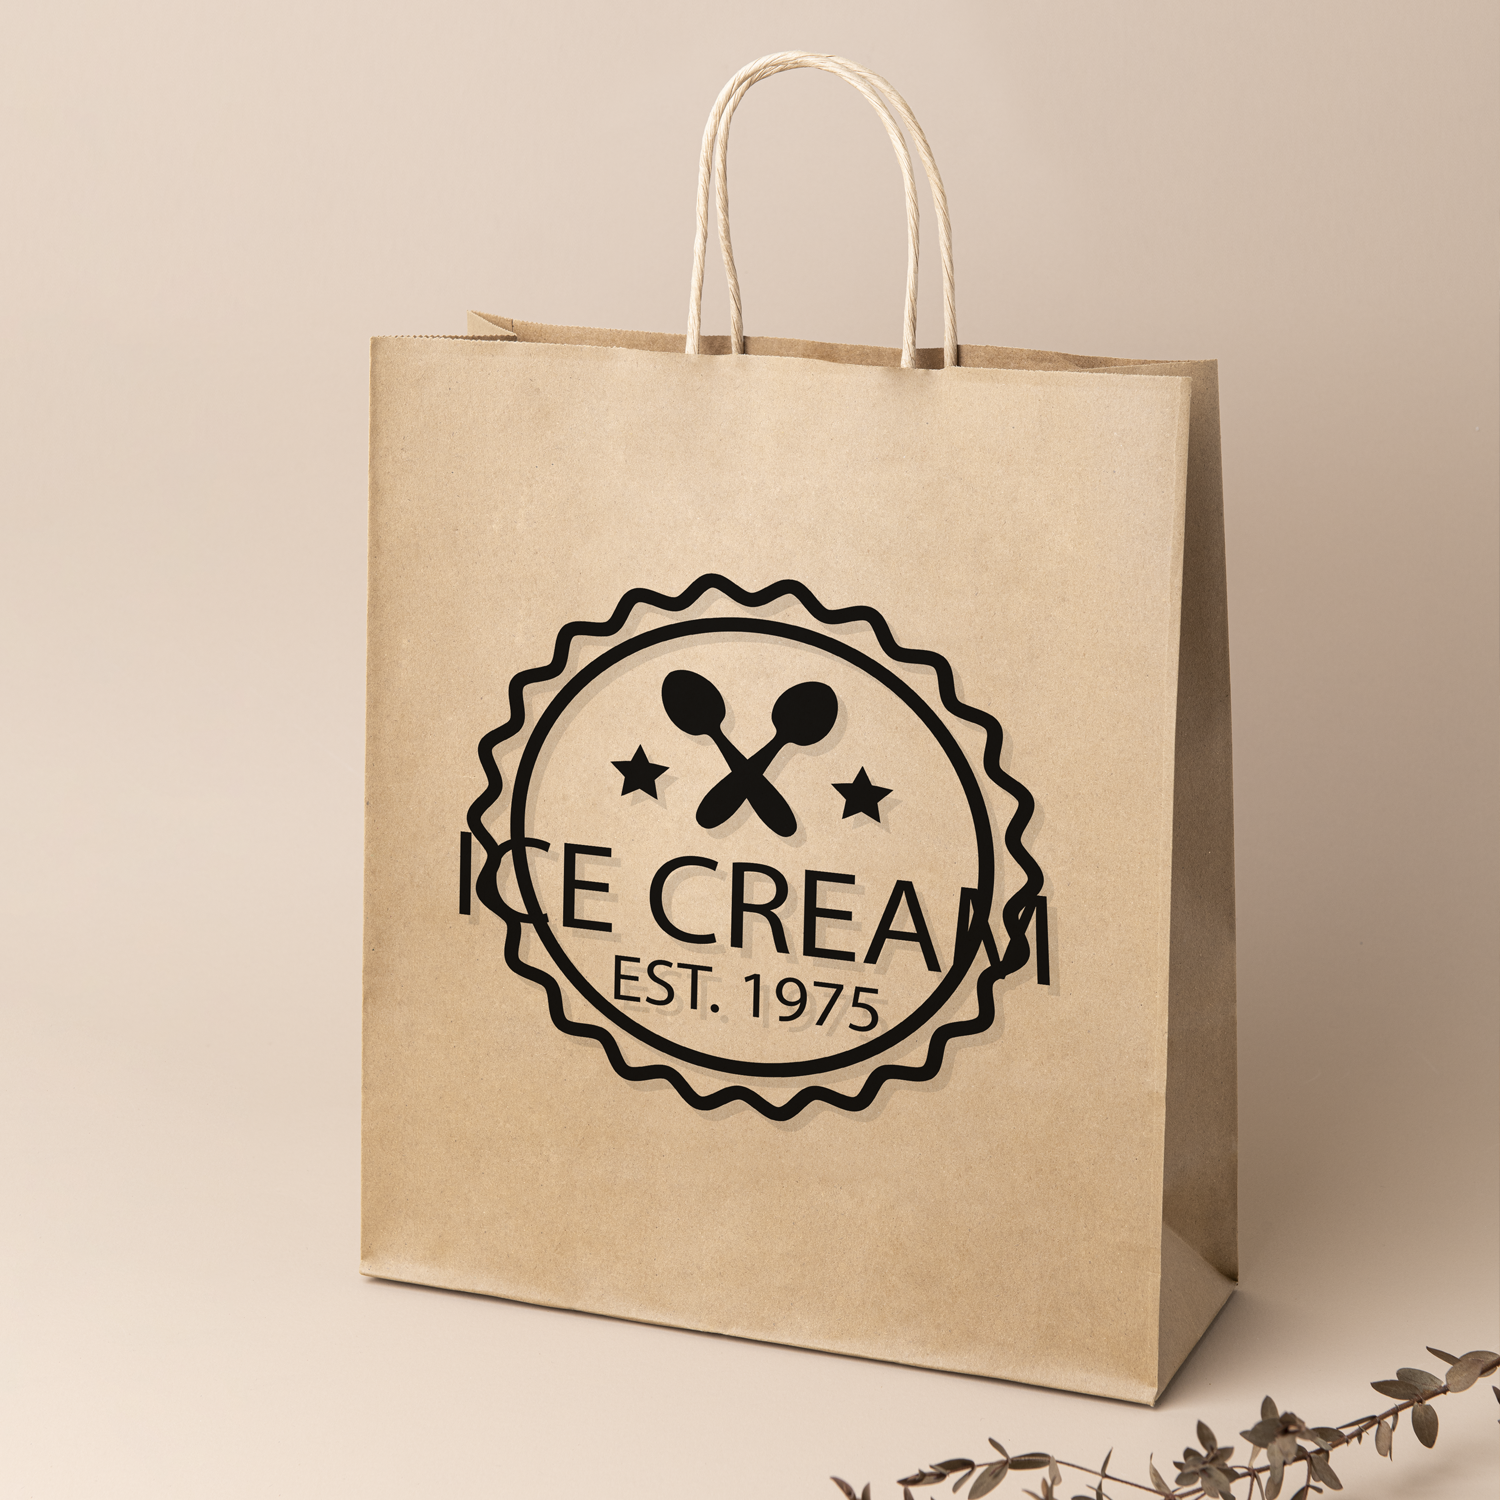 Kraft paper bags are suitable for businesses wanting to brand their packaging